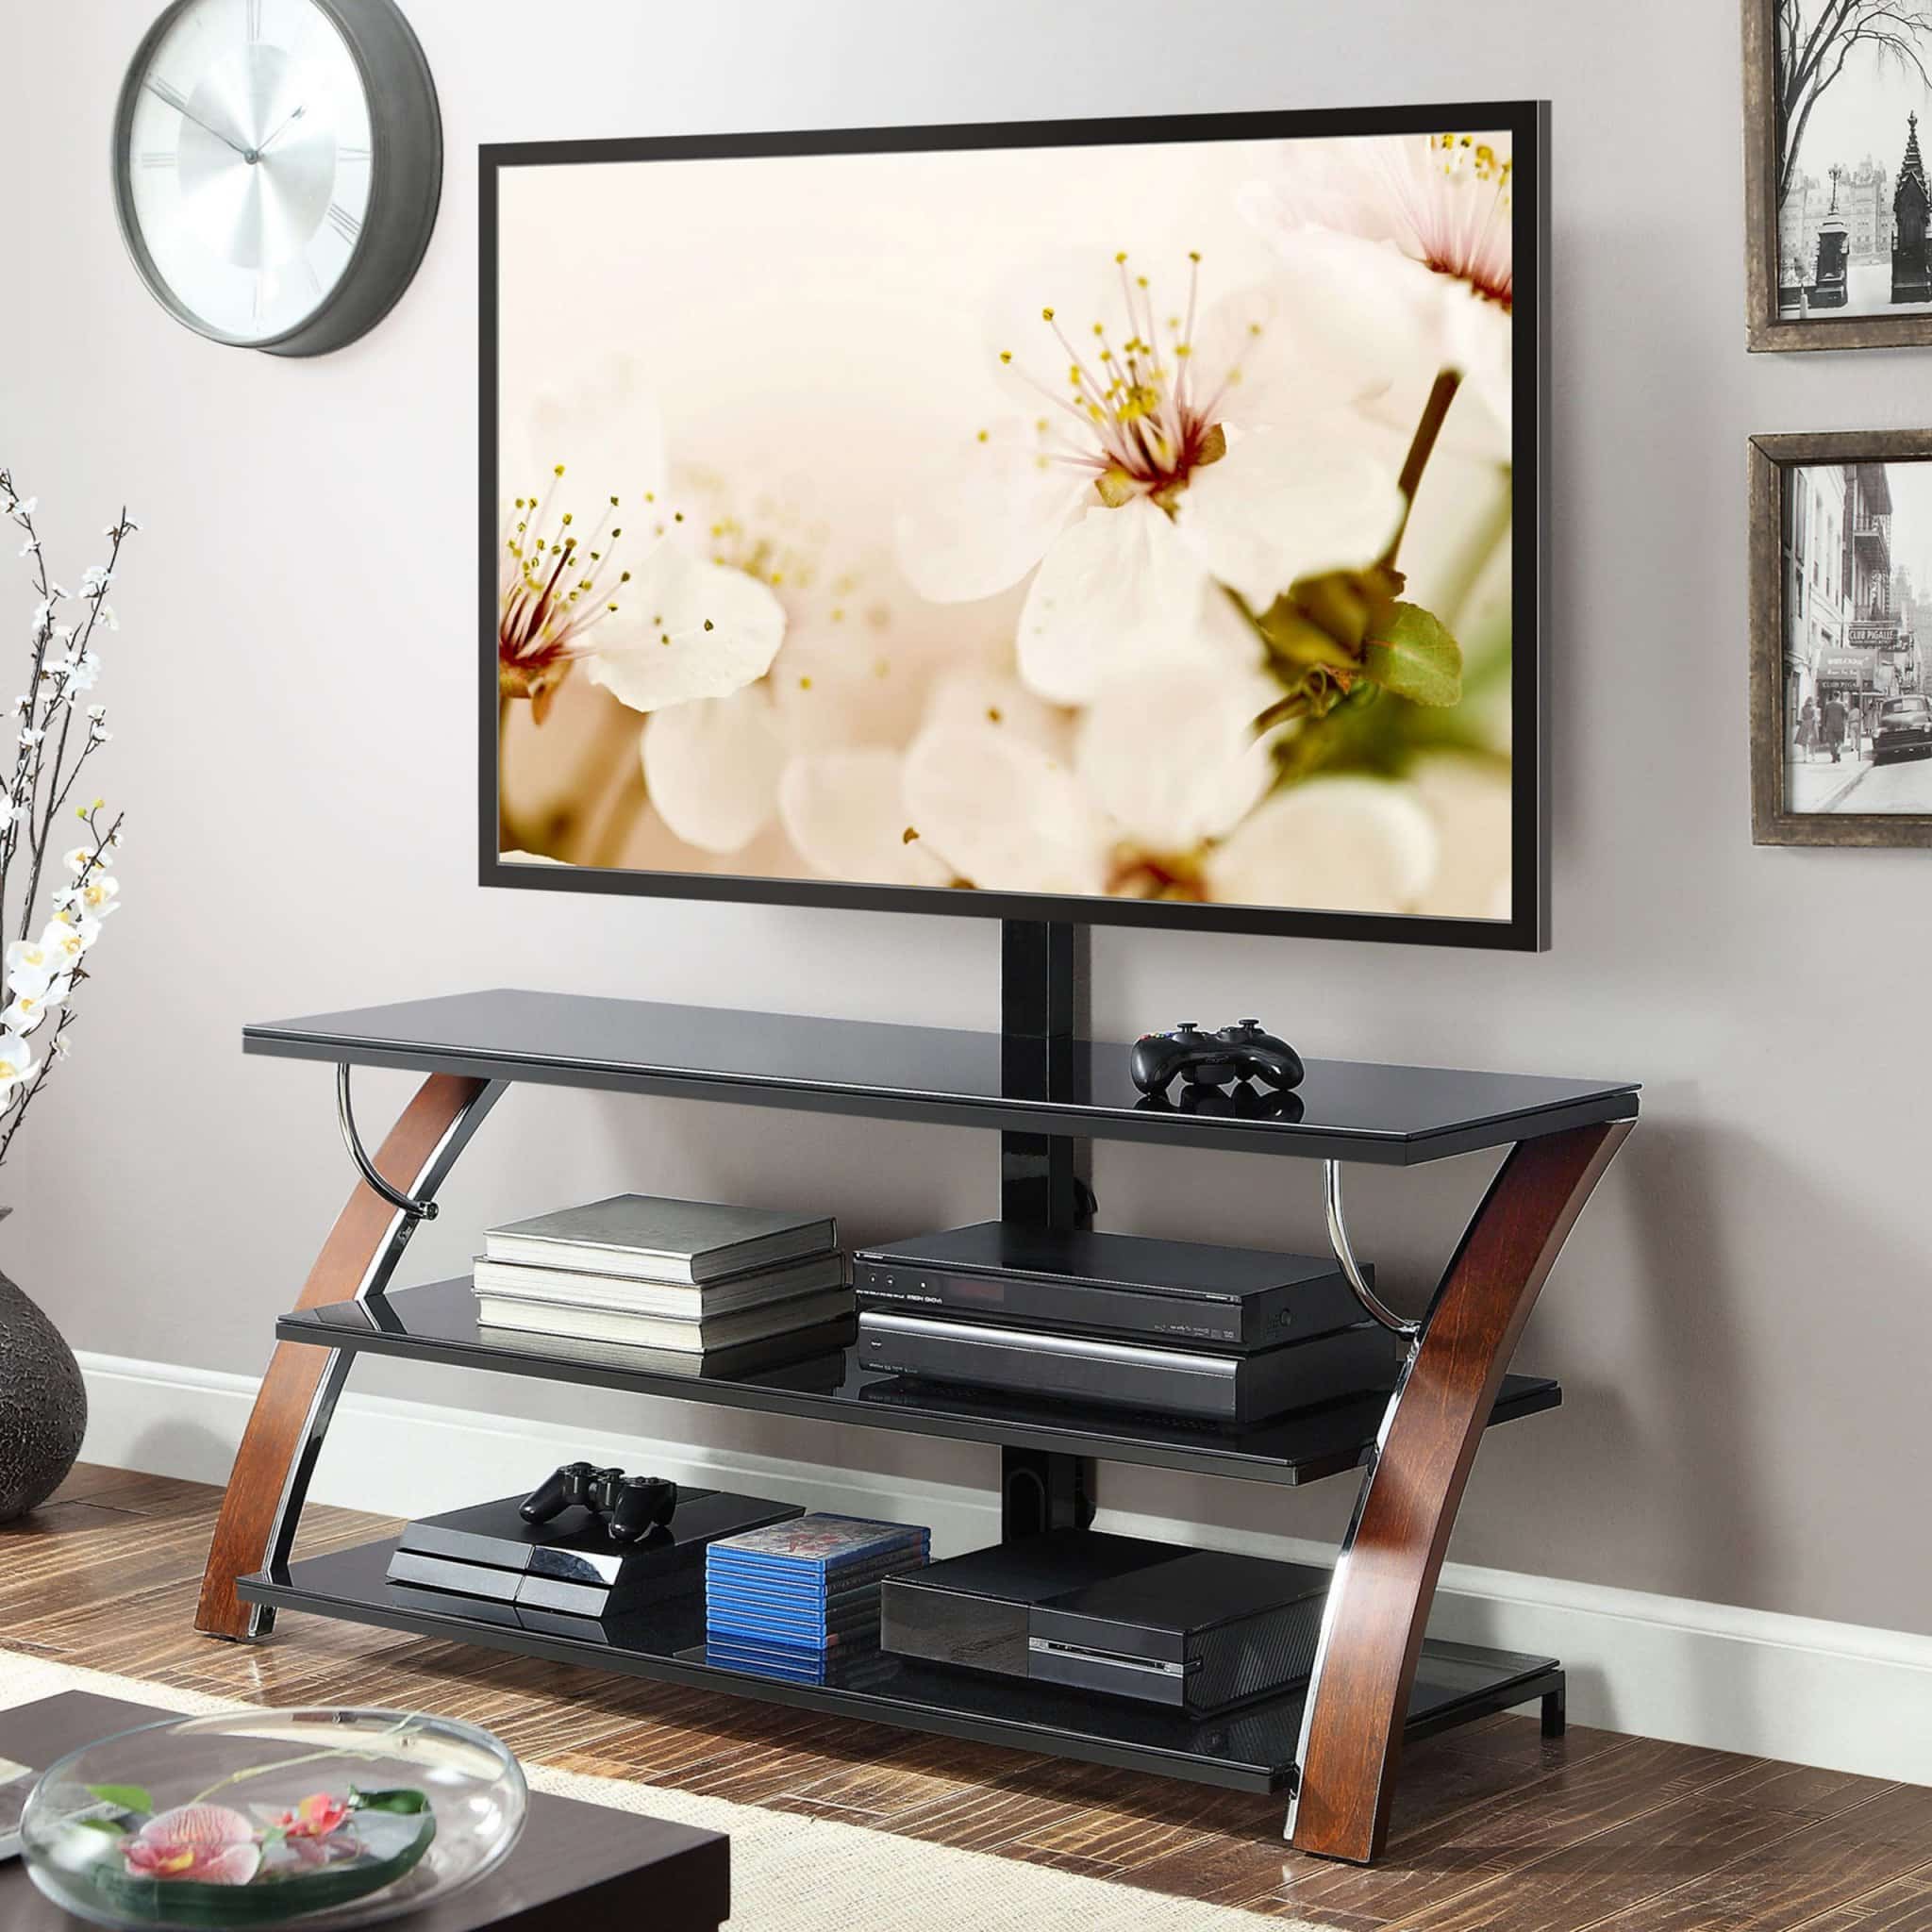 He paid S$138 (RM624.45) for the television set. Image for illustration only. Image credit: Whalen Furniture